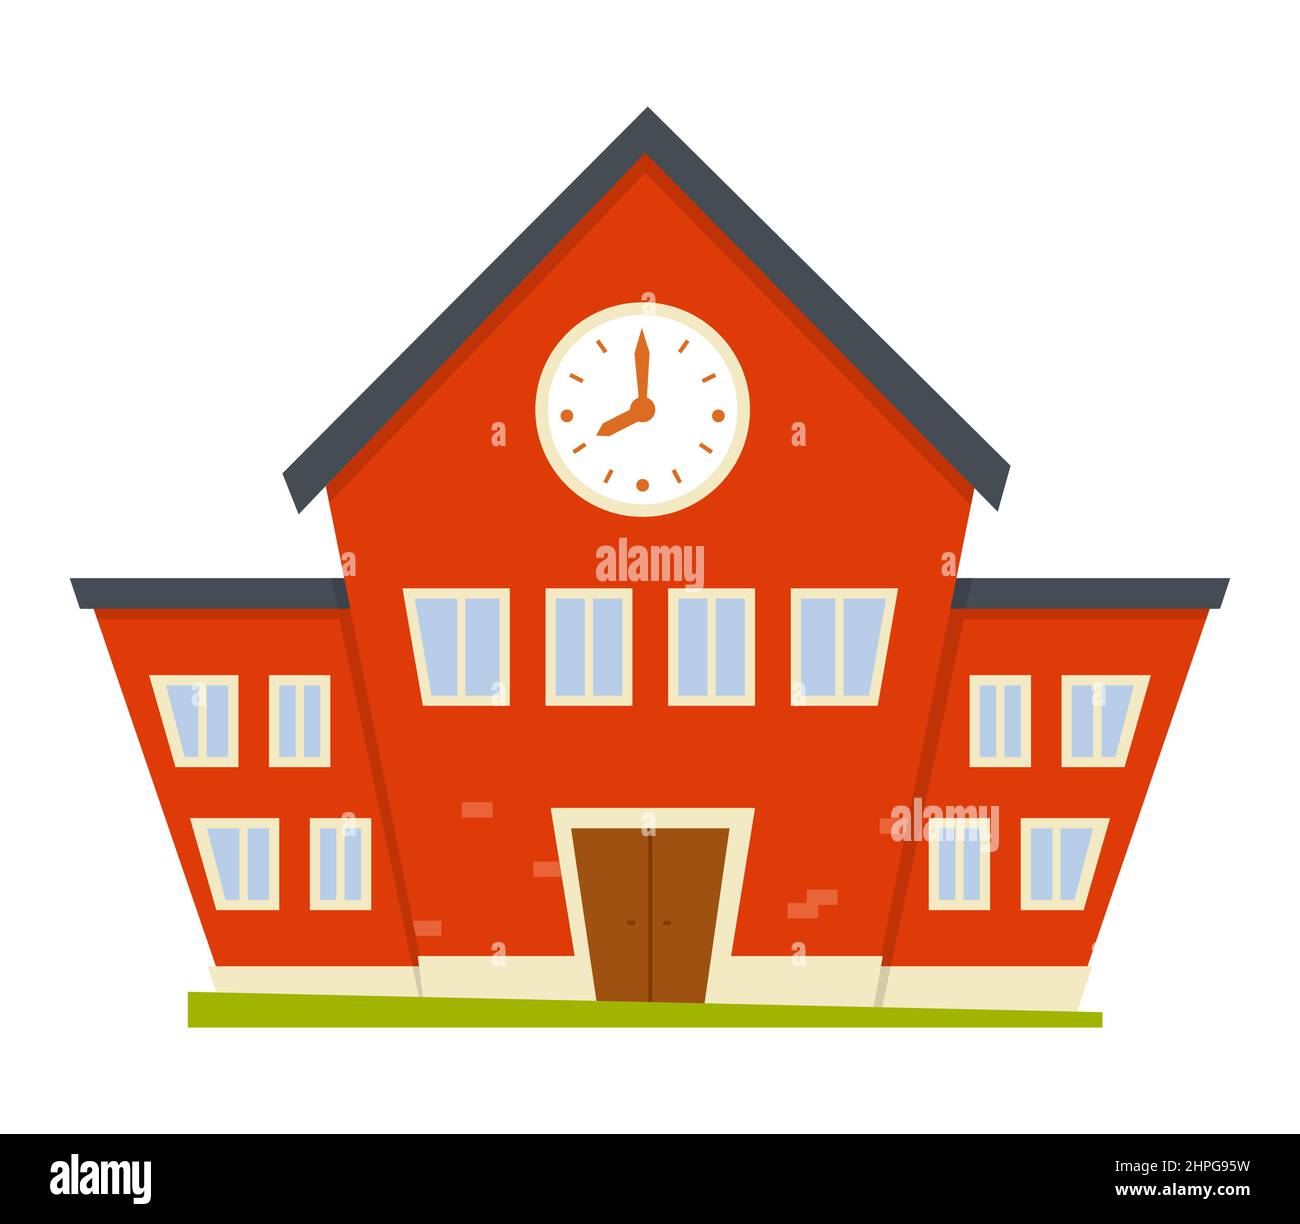 Primary school building - modern flat design style isolated icon. Neat detailed image of red house with a large clock. The beginning of education, thi Stock Vector